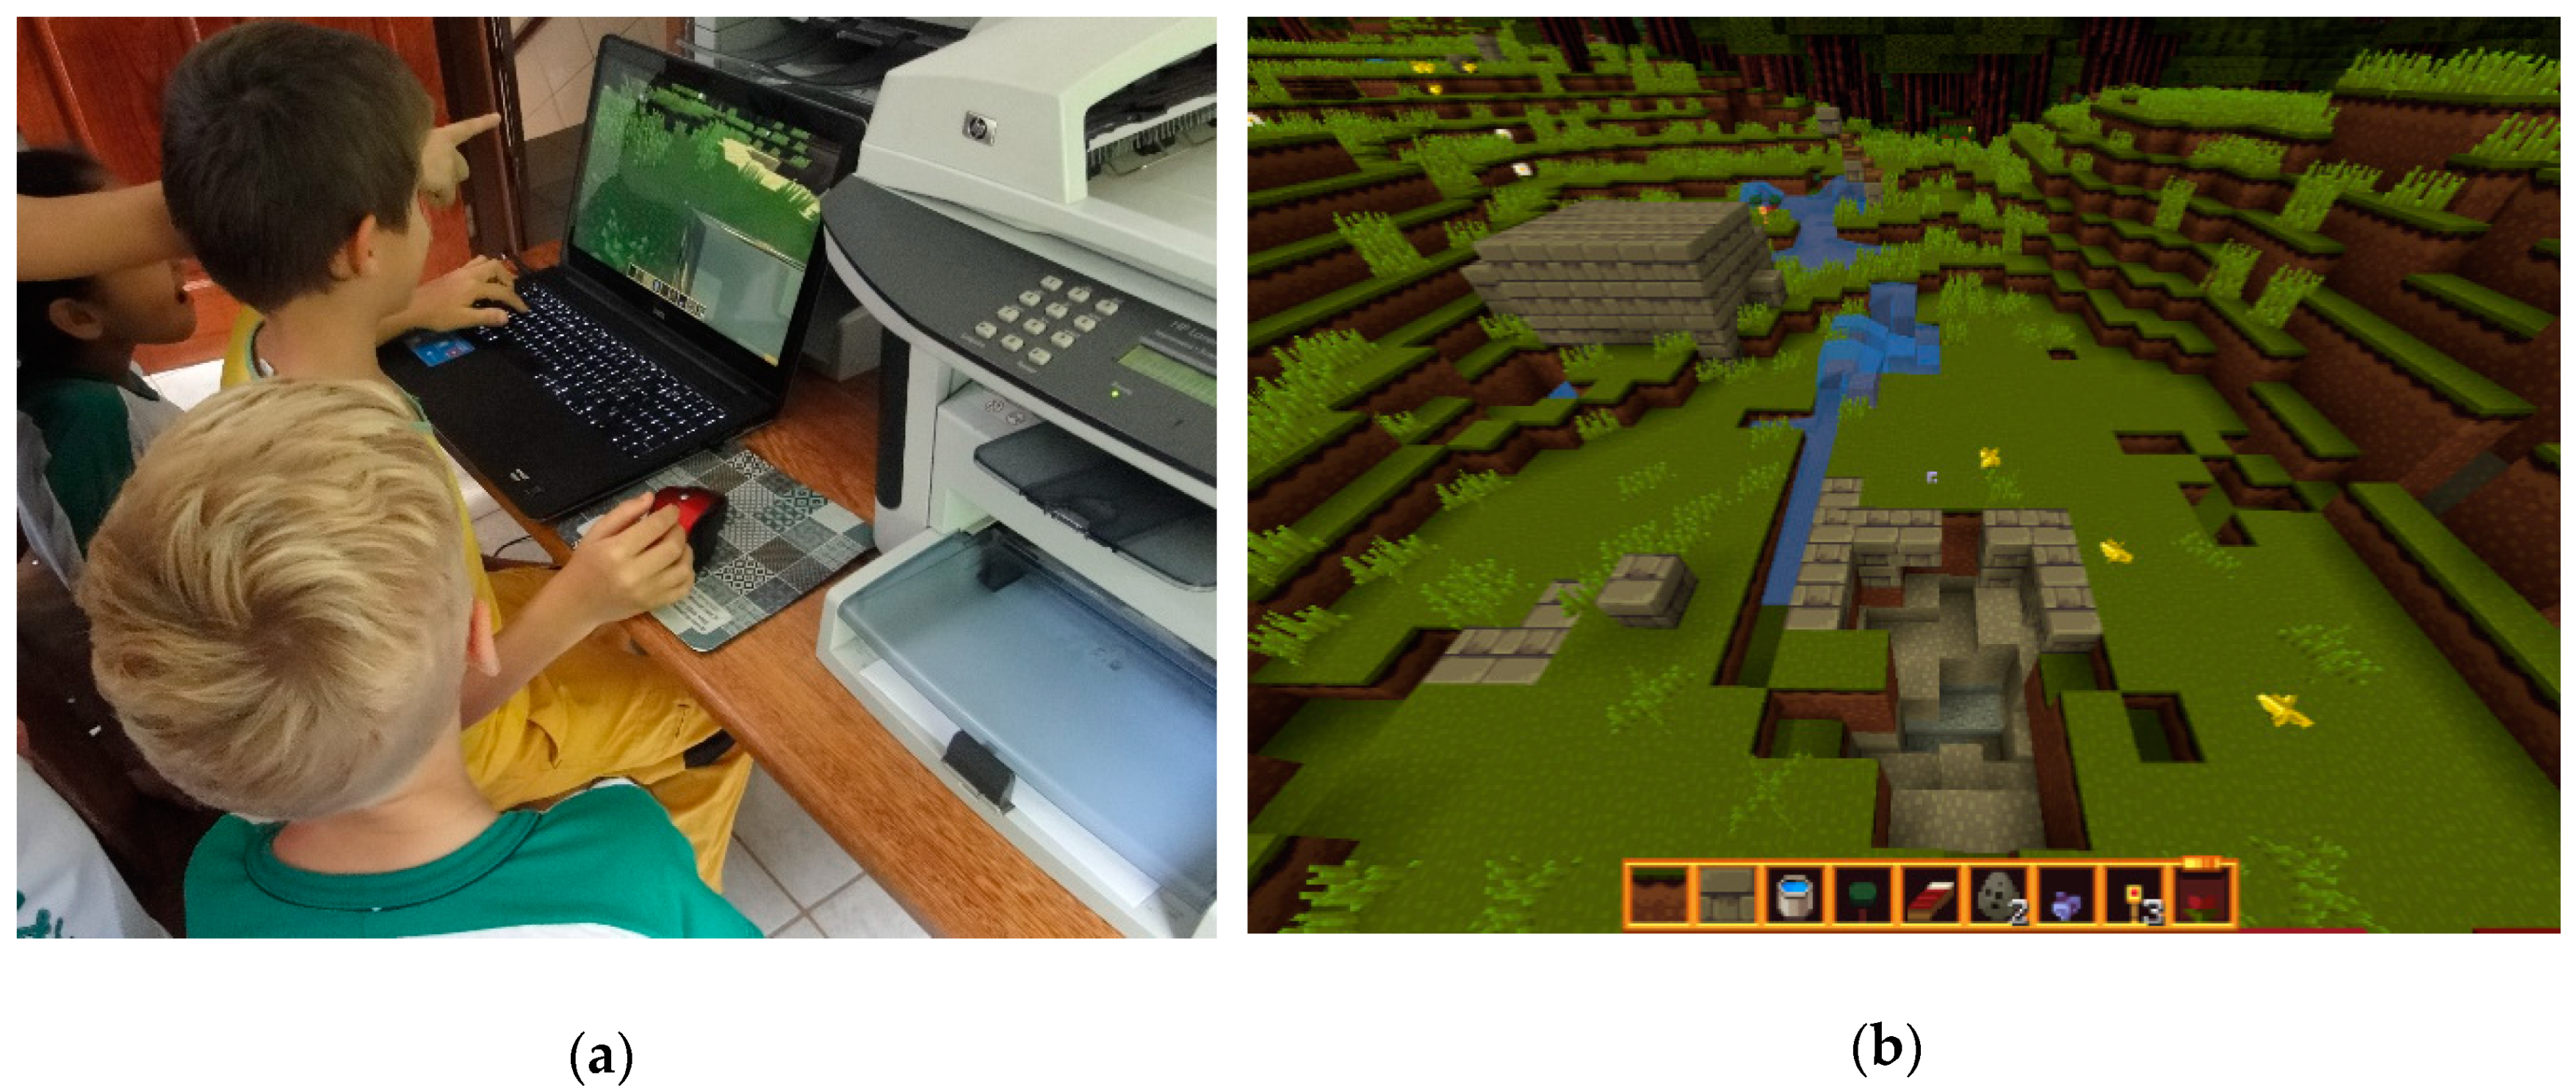 Ijgi Free Full Text Minecraft As A Tool For Engaging Children In Urban Planning A Case Study In Tirol Town Brazil Html